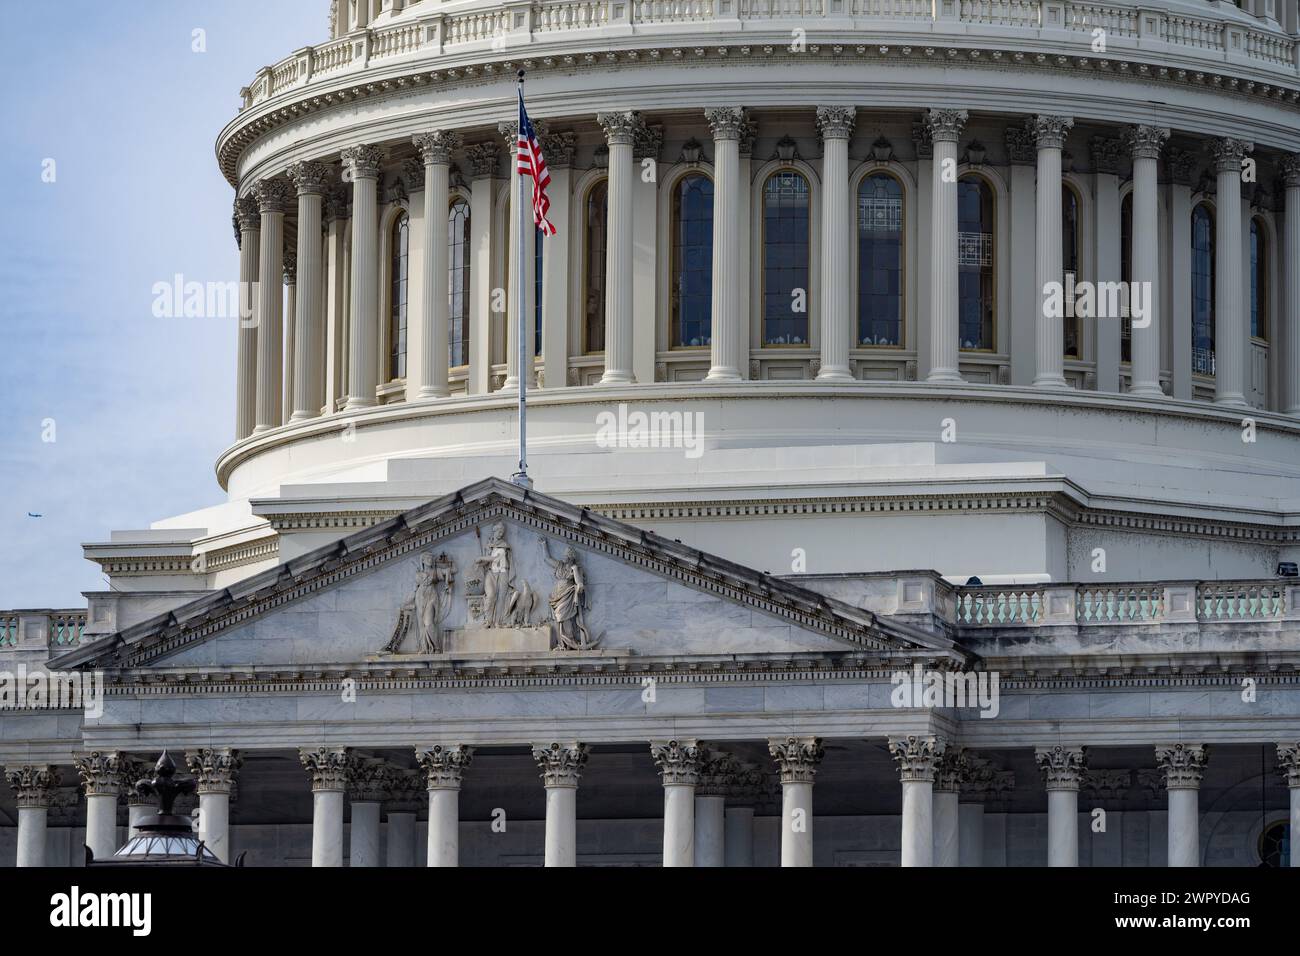 U.S. Capitol Building close-up.  American Flag Flying with Capitol building dome in the background. Stock Photo